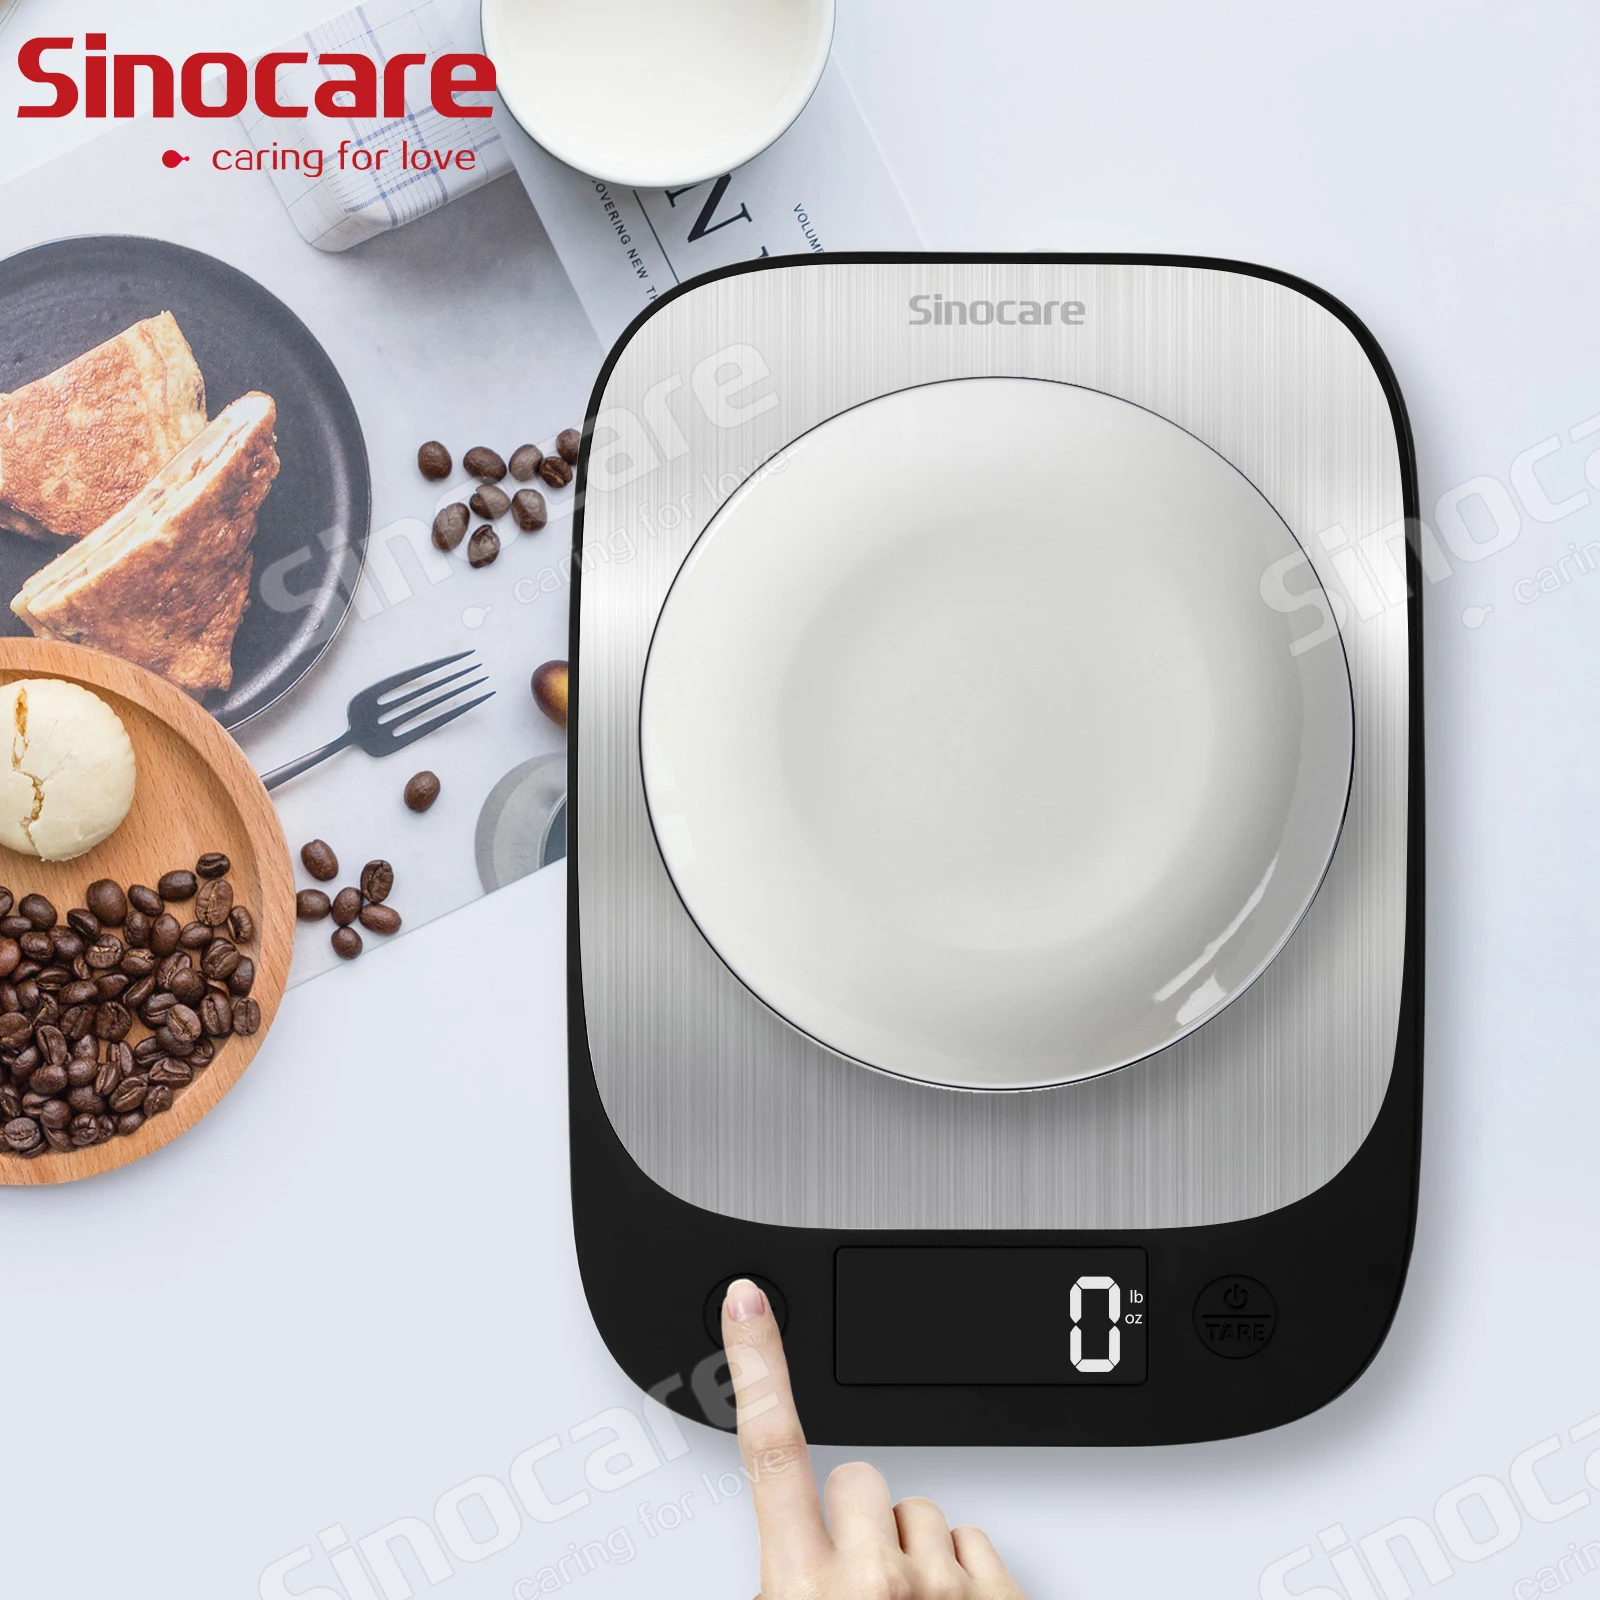 

Sinocare Multifunctional Vegetable and Fruit Kitchen Electronic Scale Overload Manual Digital Food Scale Waterproof with battery